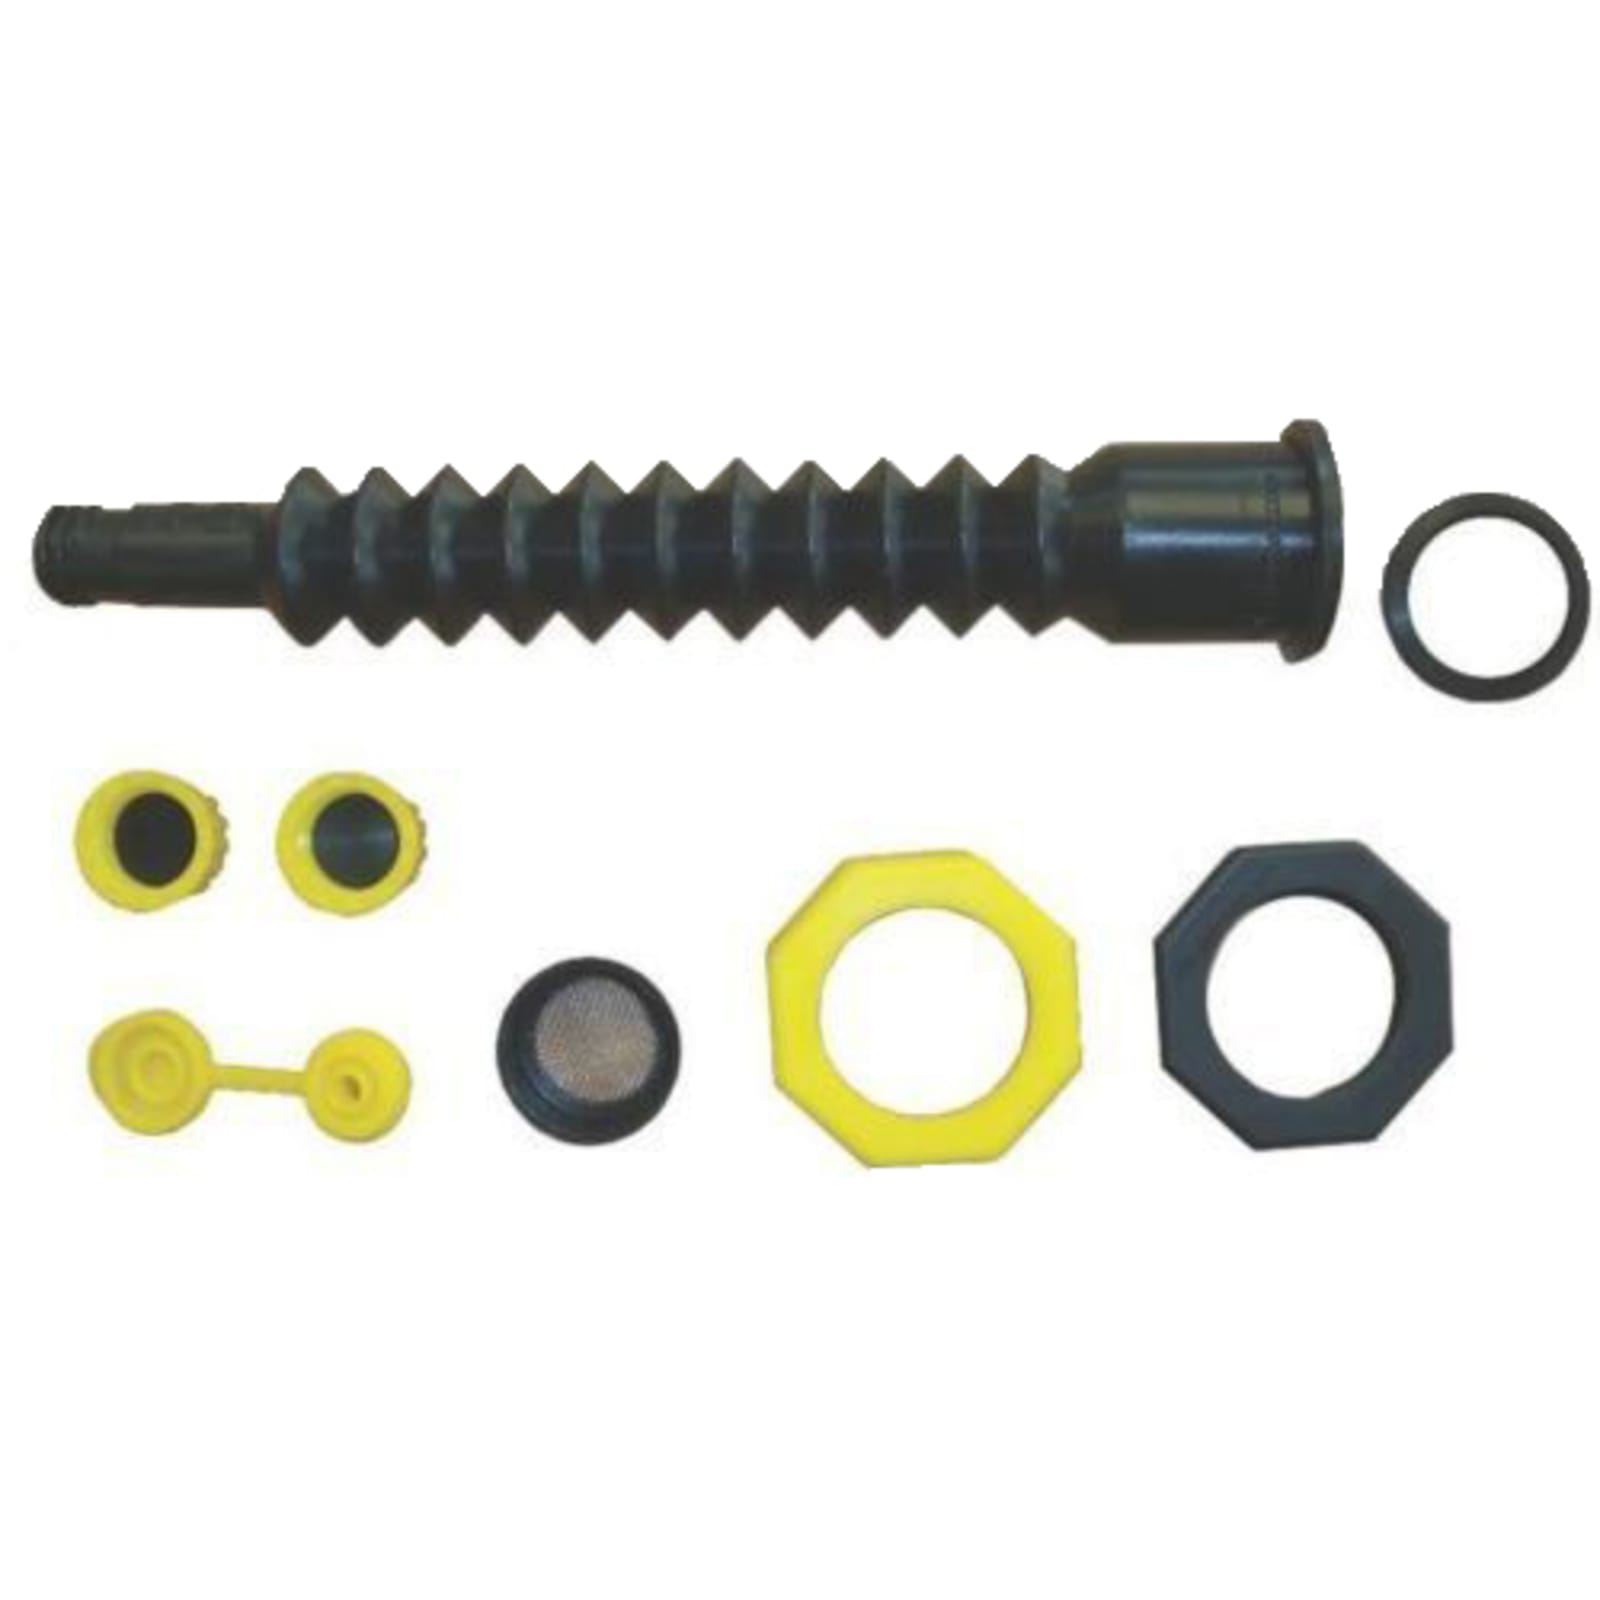 Universal Gas Can Spout Replacement, Flexible Fuel Can Nozzle Kit